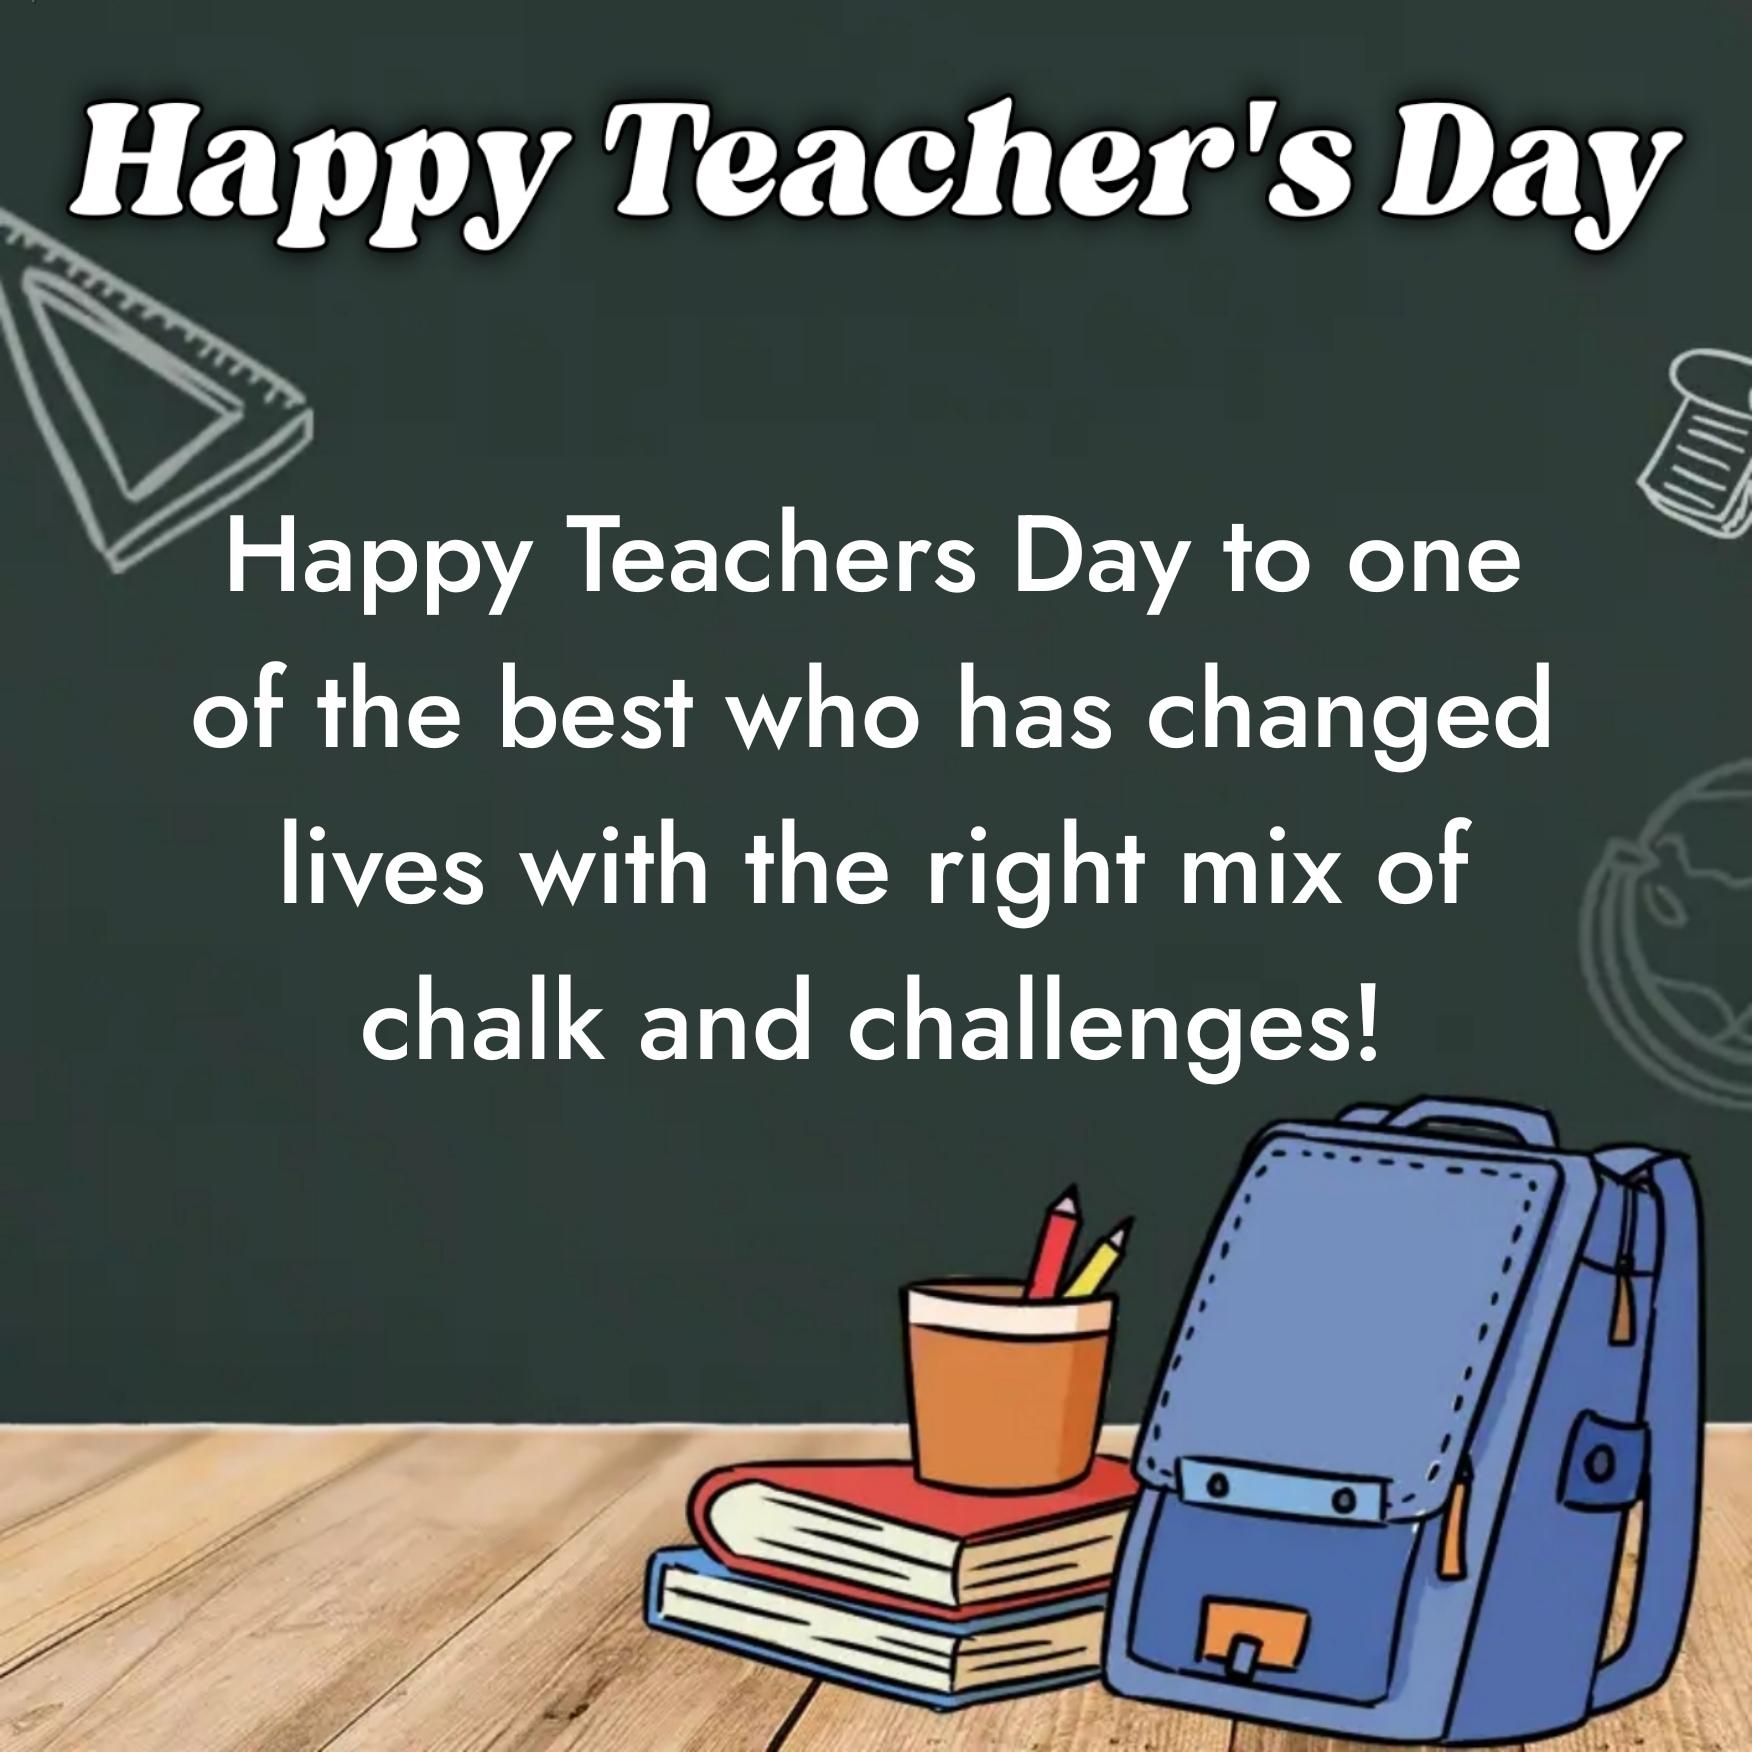 Happy Teachers Day to one of the best who has